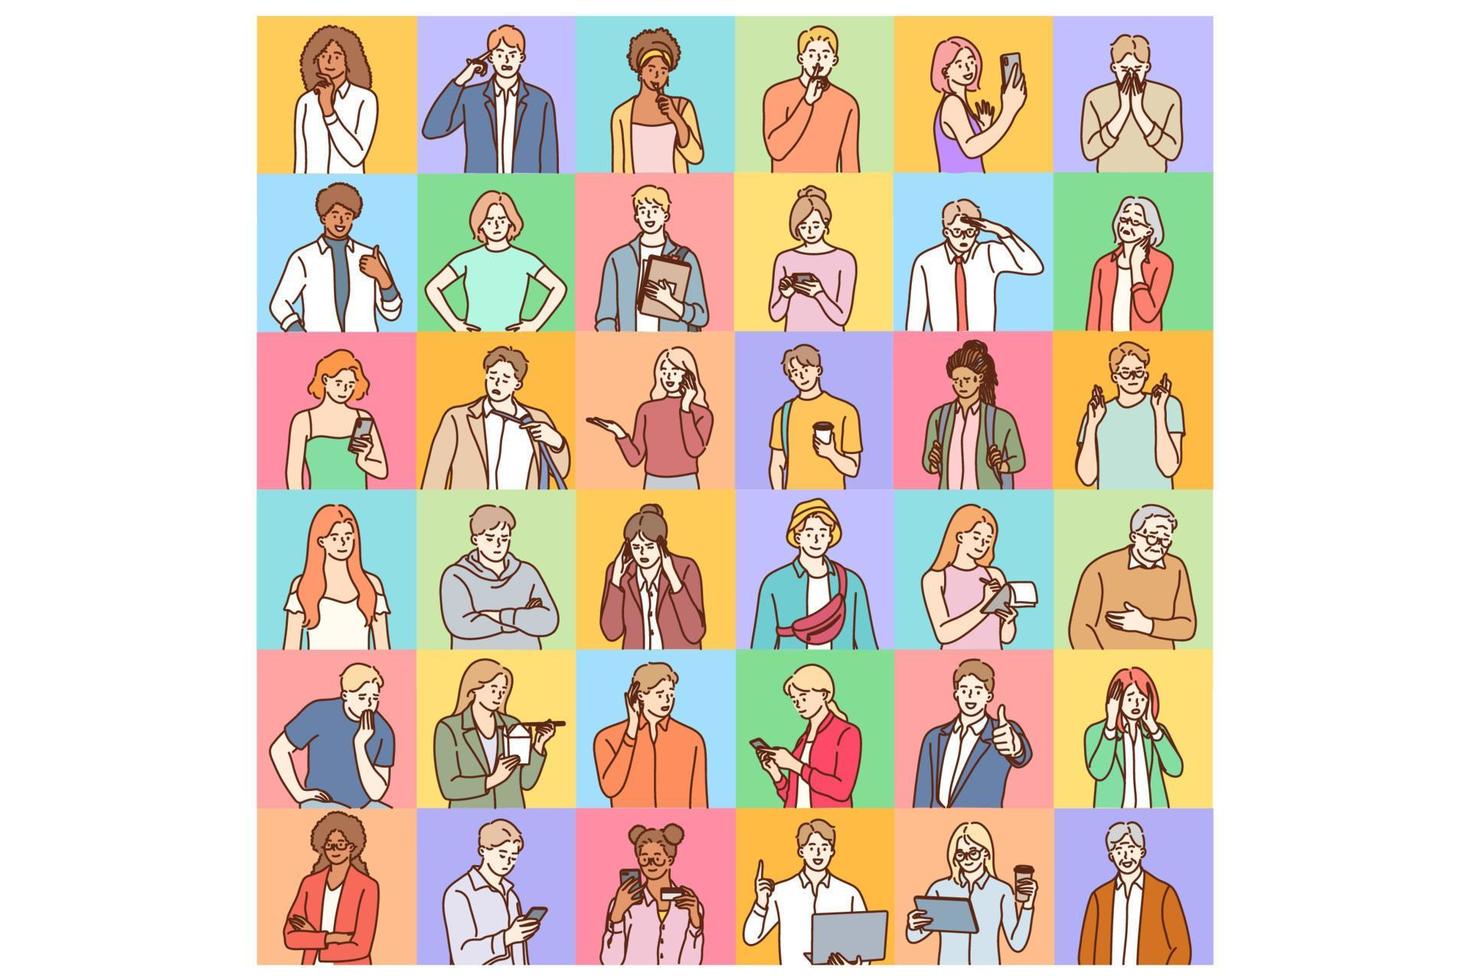 Avatars, people diversity worldwide concept. Portraits of different people of various age and race doing everyday things and having various facial expressions isolated on colourful backgrounds vector